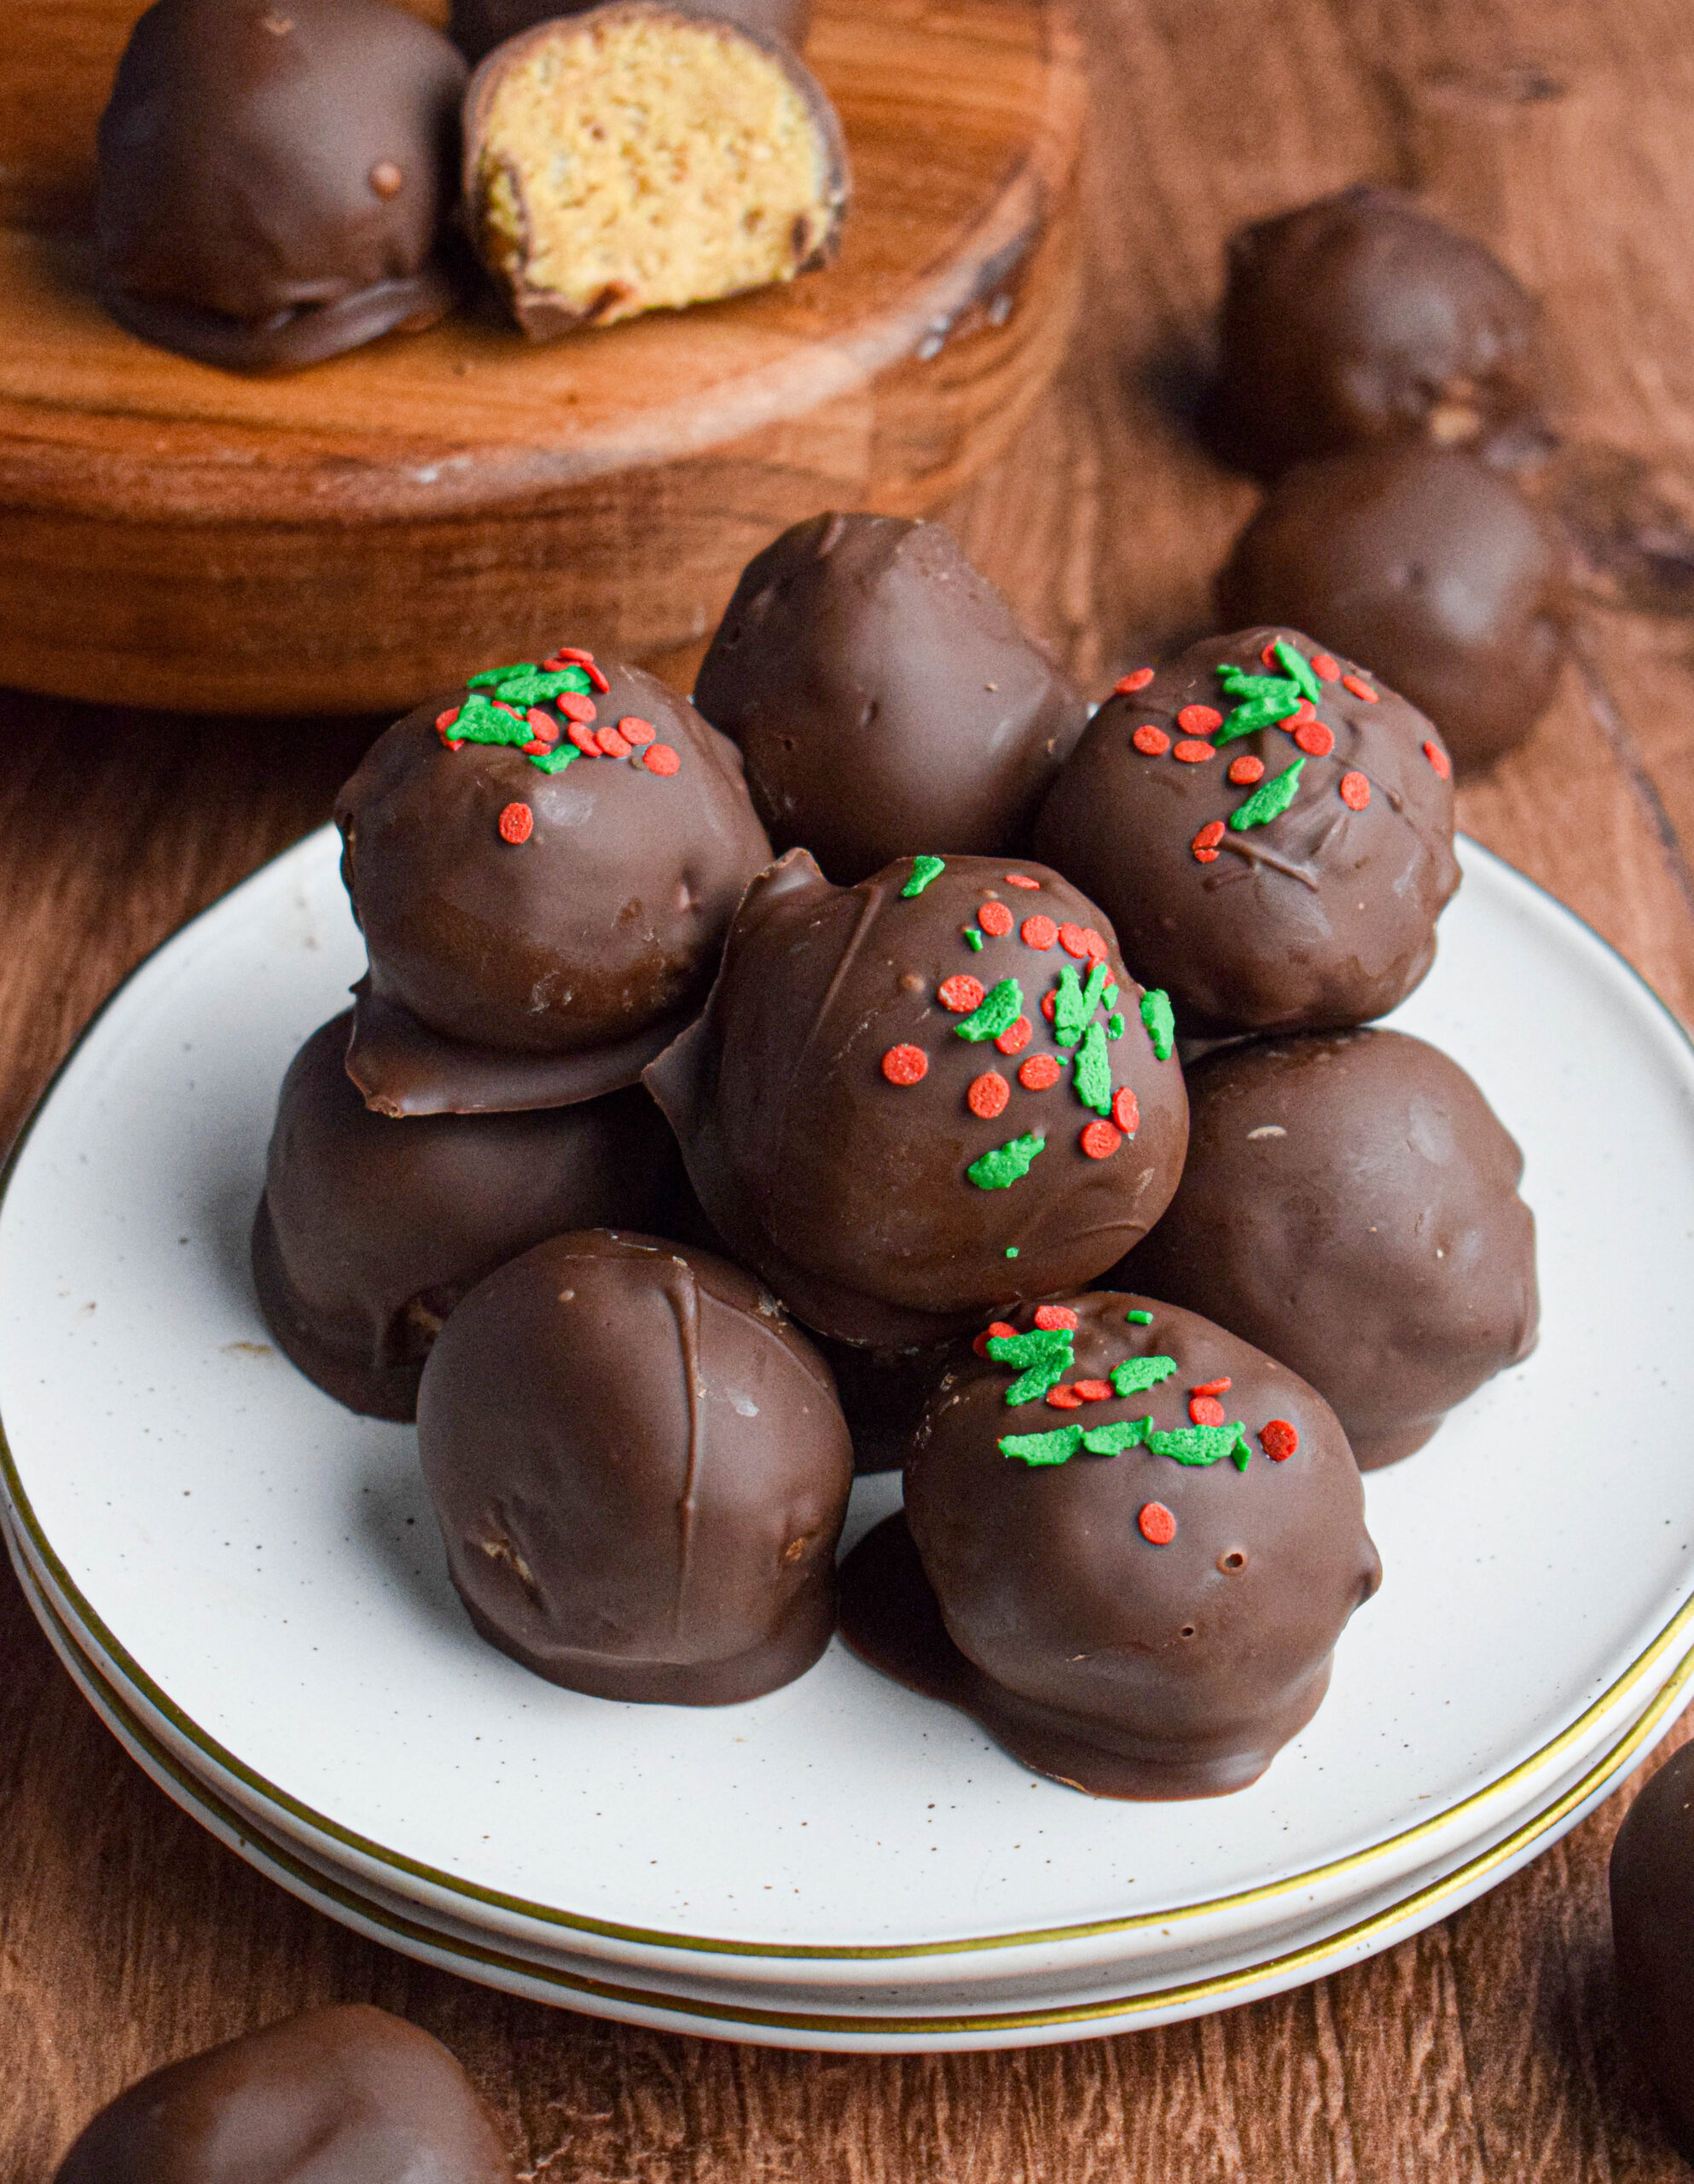 plate with a pile of chocolate covered peanut butter balls, some with holiday sprinkles, others plain